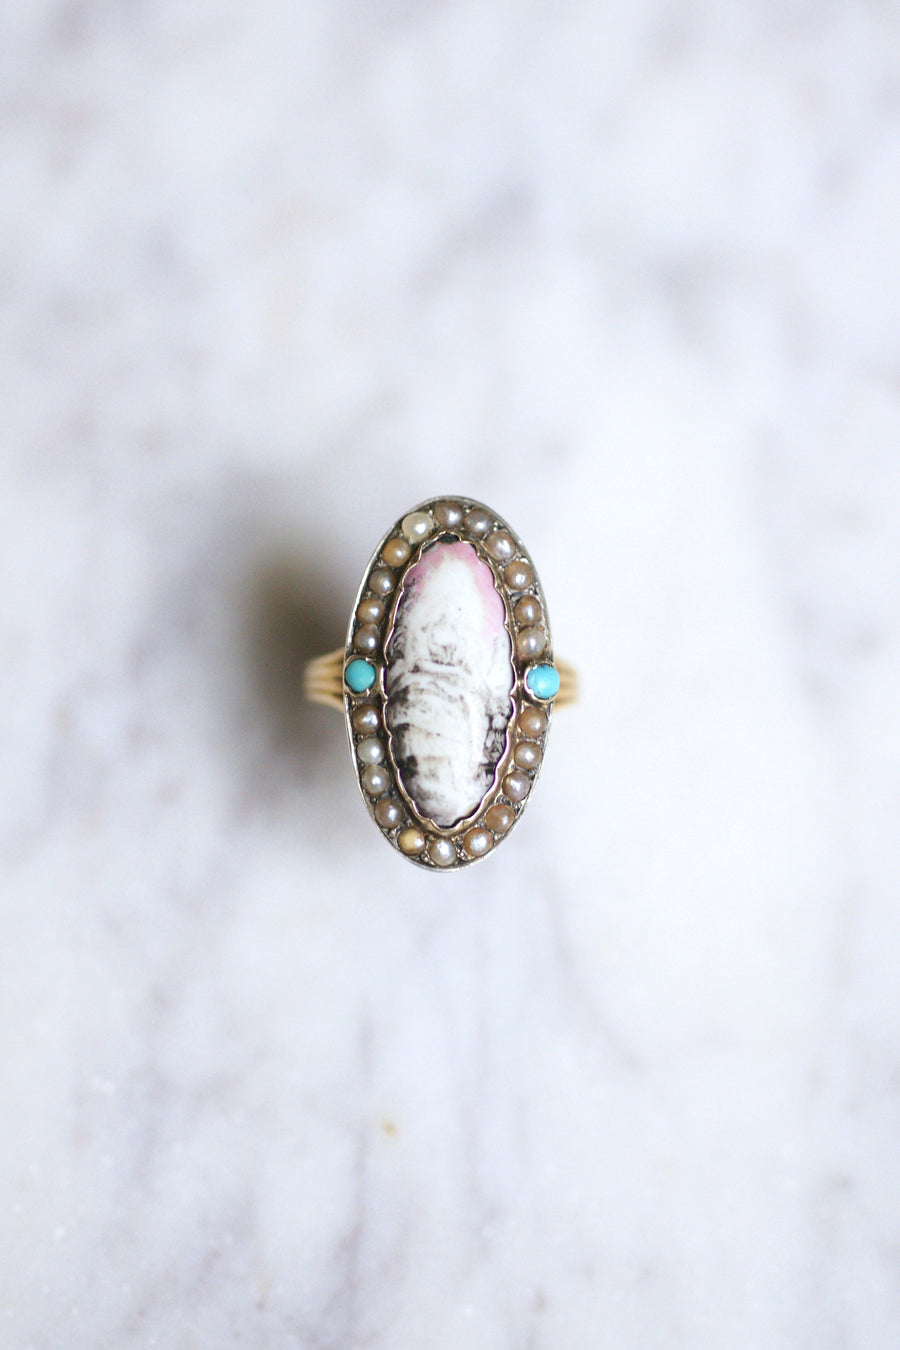 Antique gold and silver ring, miniature on porcelain - Galerie Pénélope